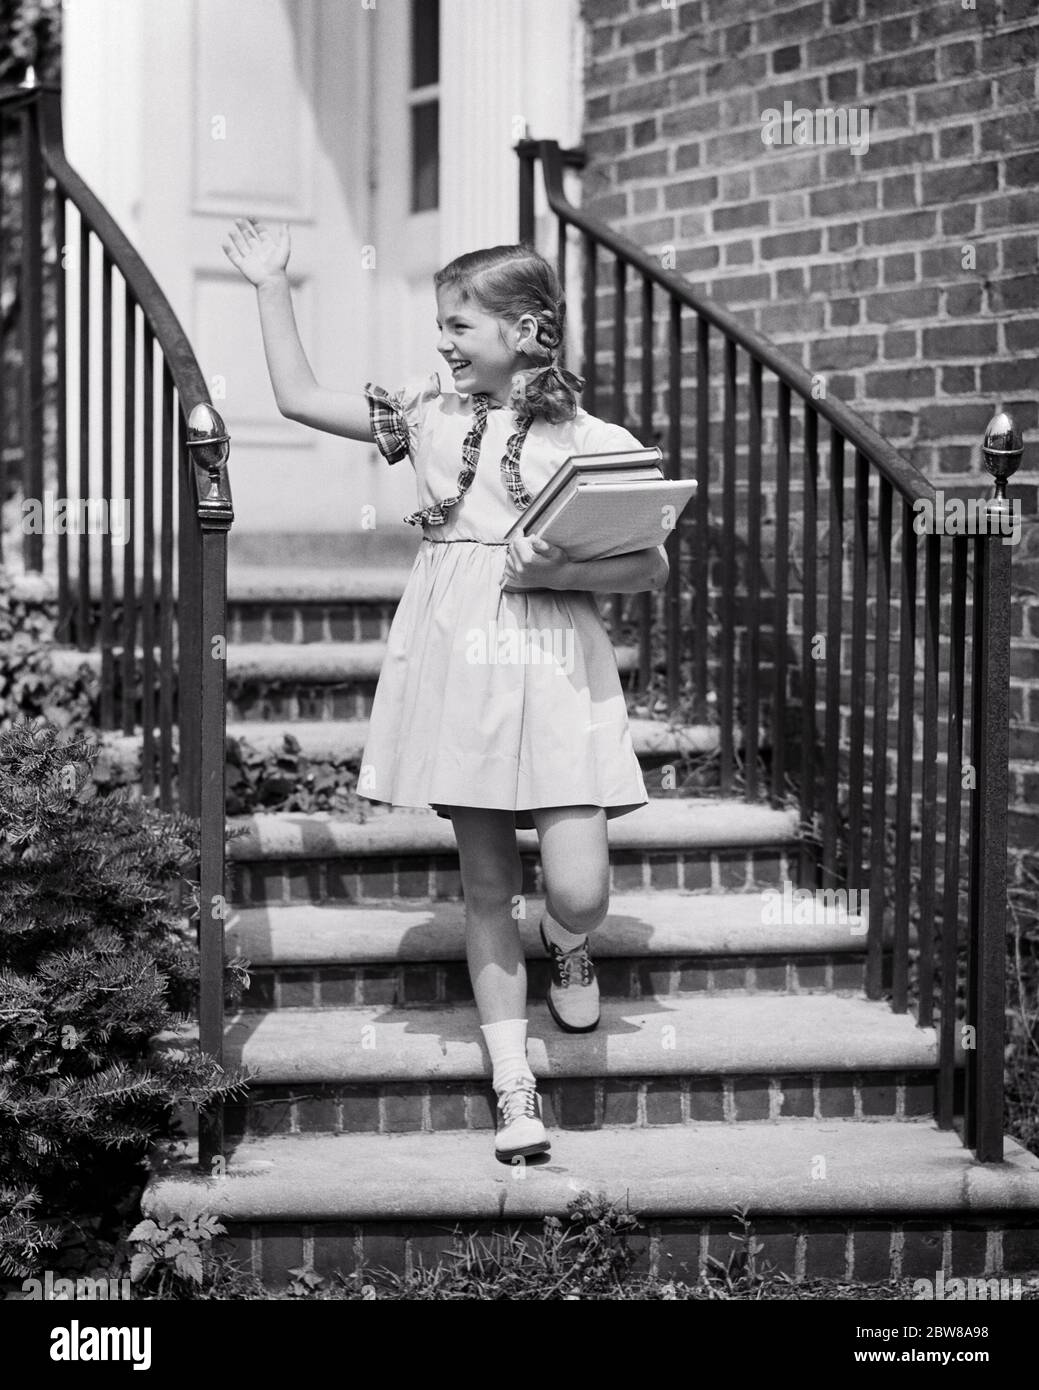 1940s SMILING GIRL WALKING DOWN STAIRS OF BRICK HOME CARRYING SCHOOL BOOKS  WAVING HER HAND WEARING BRAIDS SADDLE OXFORD SHOES - s3560 HEL001 HARS  STYLE COMMUNICATION INFORMATION PLEASED JOY LIFESTYLE SATISFACTION BRICK